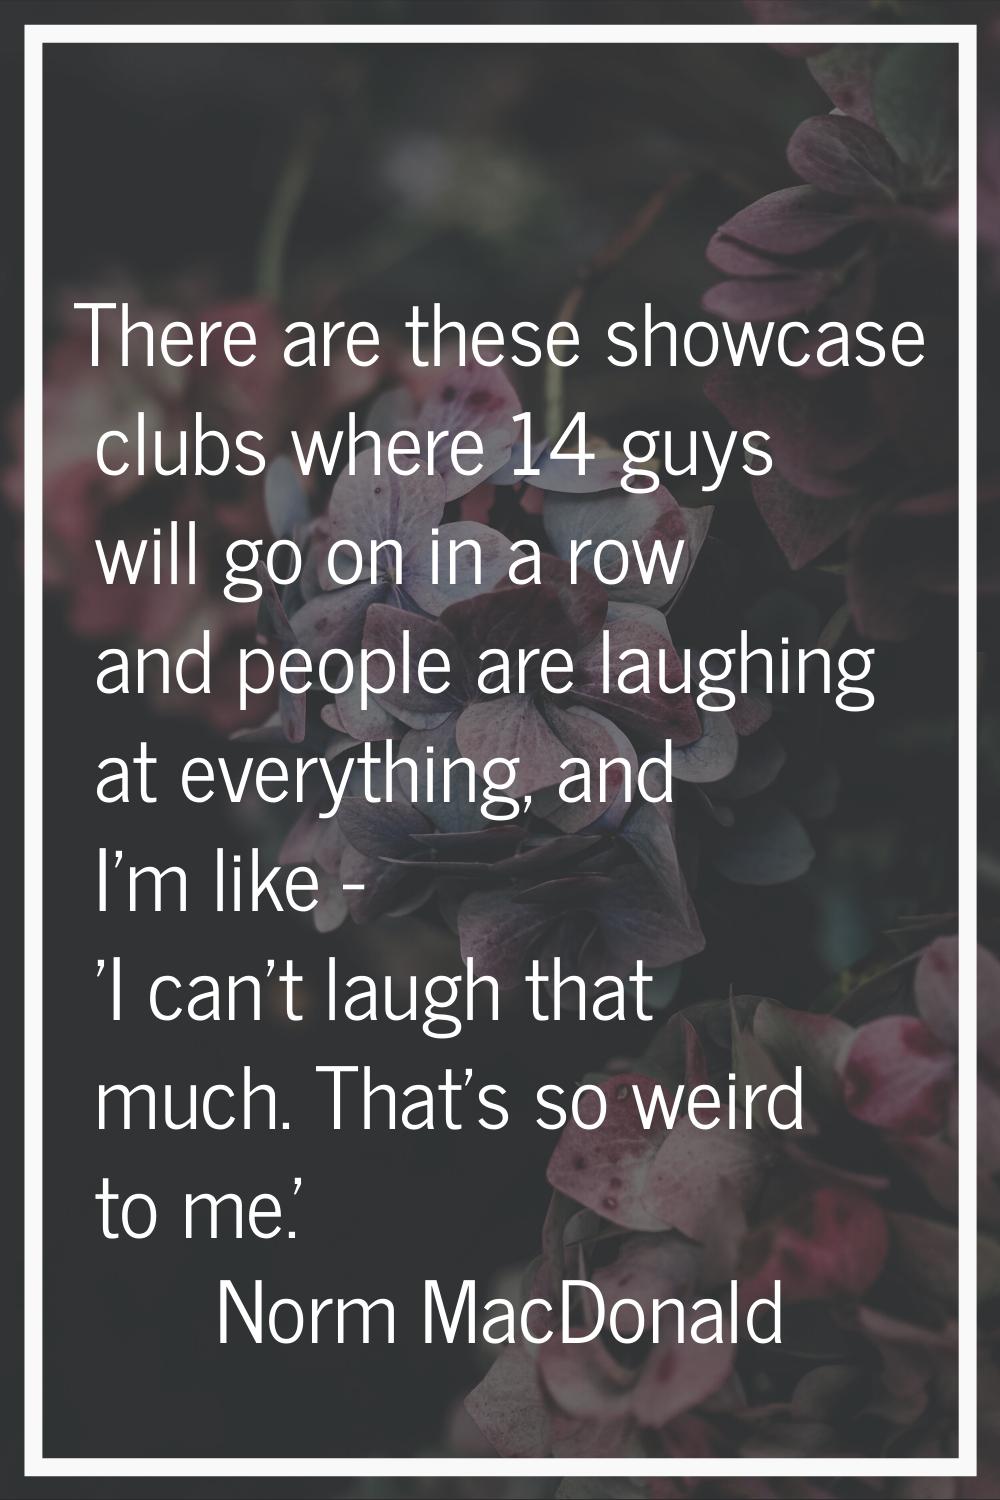 There are these showcase clubs where 14 guys will go on in a row and people are laughing at everyth